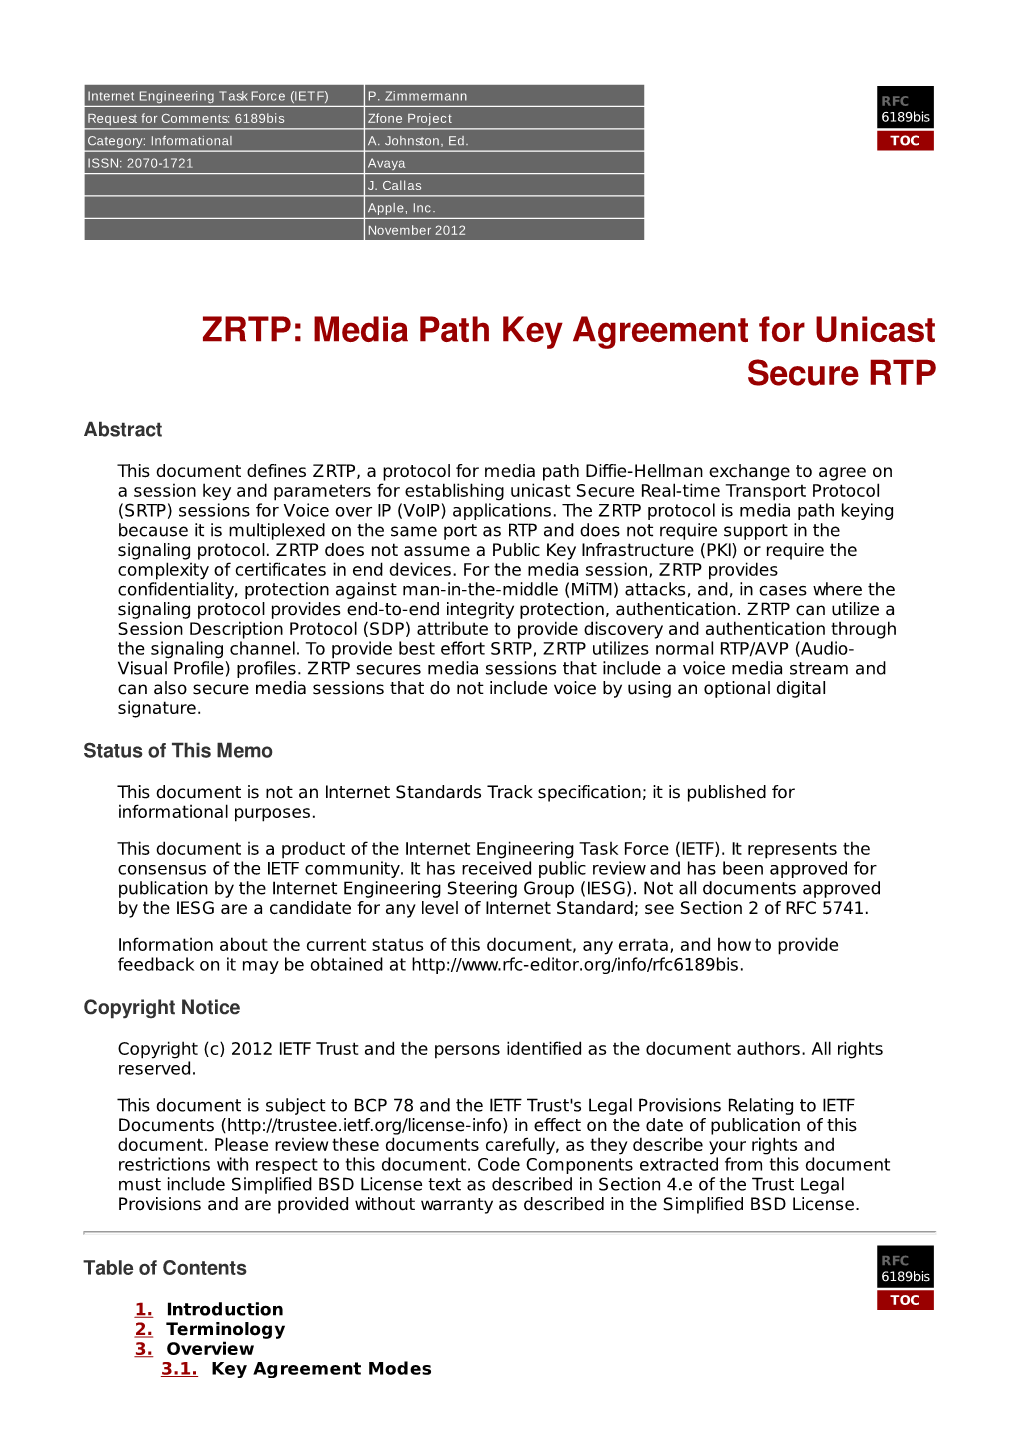 ZRTP: Media Path Key Agreement for Unicast Secure RTP